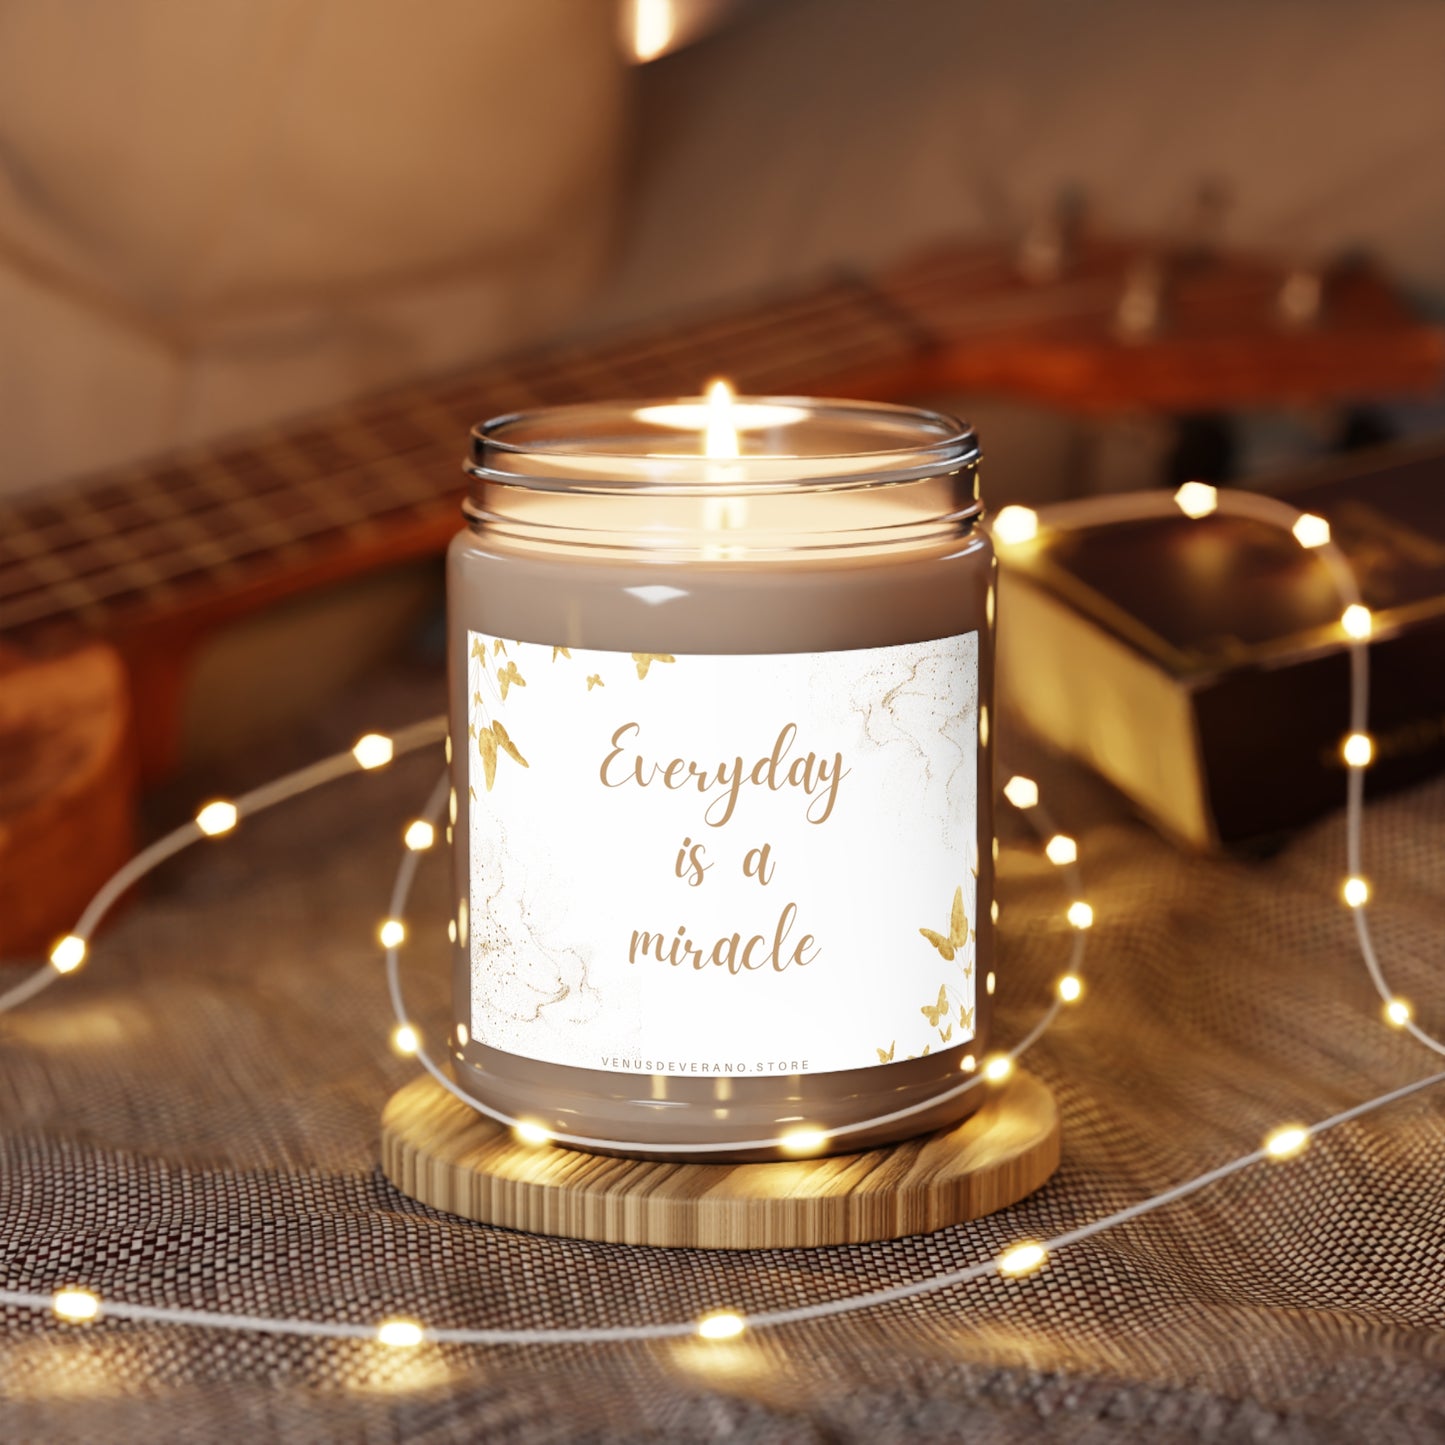 Scented Candles, 9oz - Everyday is a MIRACLE - Made 100% natural soy wax blend and cotton wick - Vanilla Bean, Comfort Spice and Sea Breeze fragrances available.